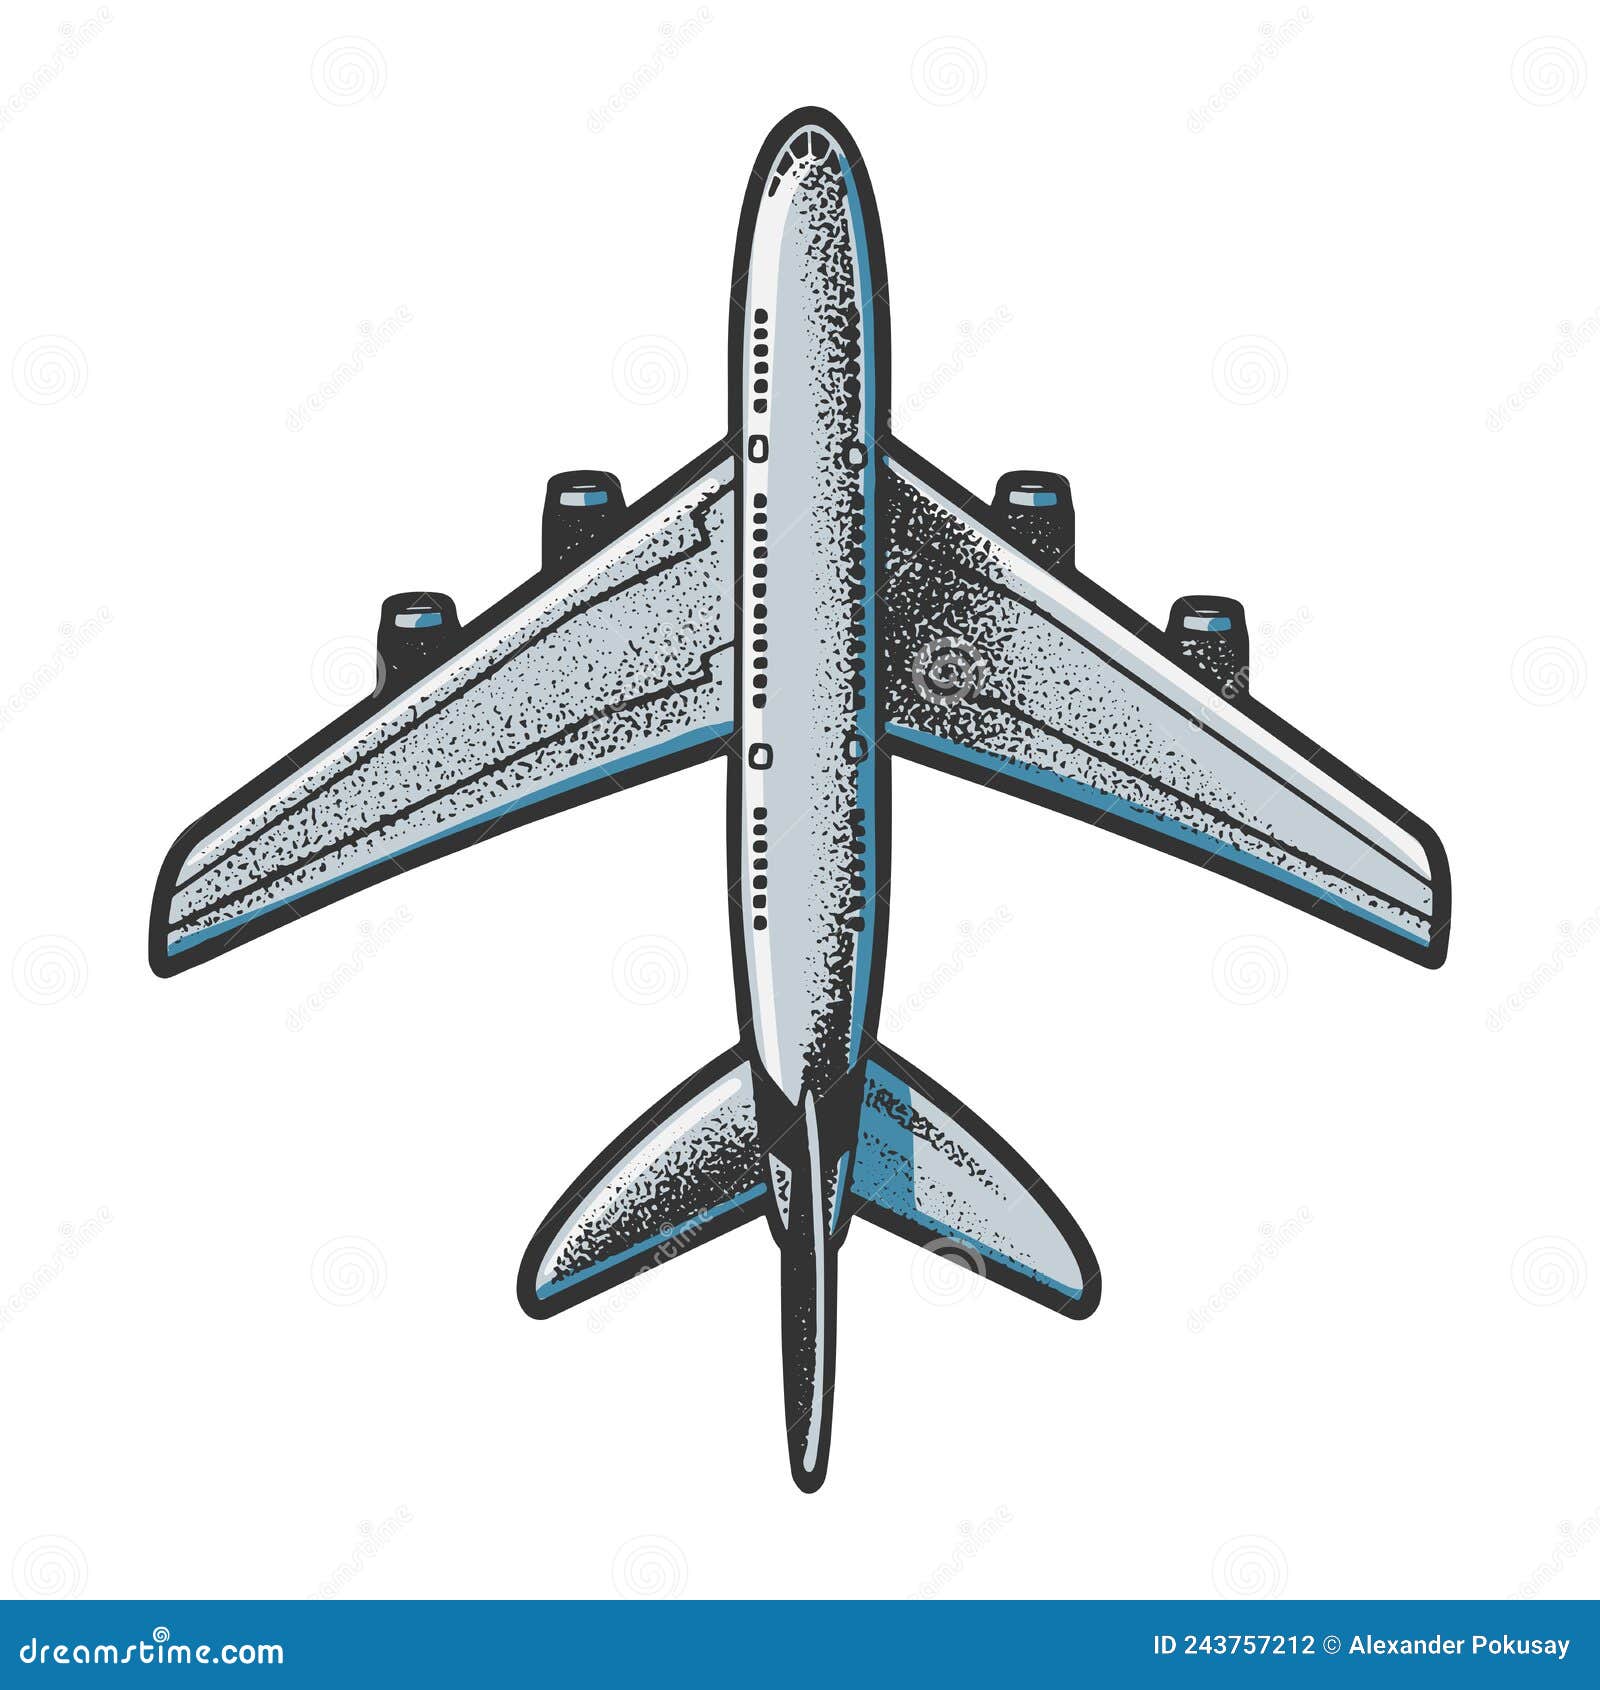 Scratchboard Airplane - Finding Time To Create